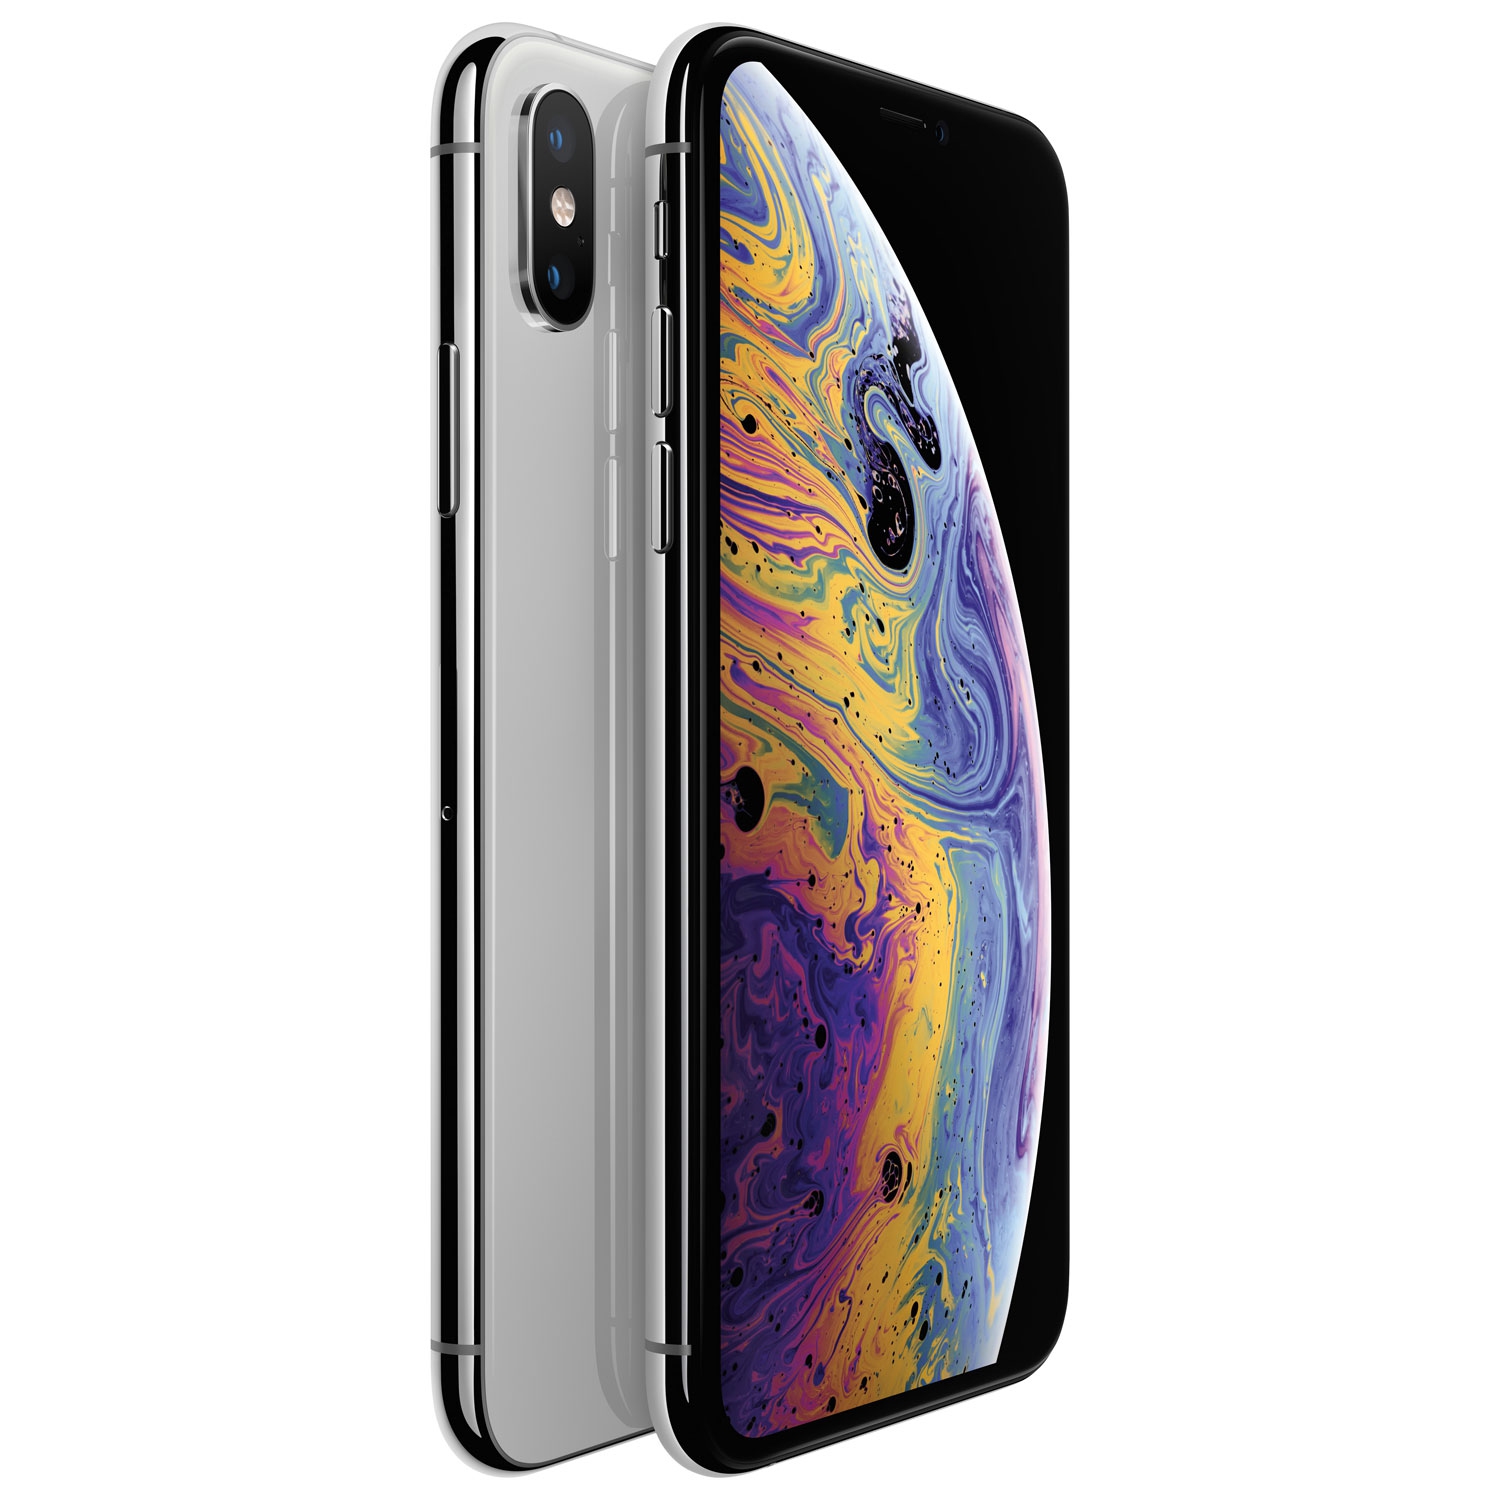 Refurbished (Excellent) - Apple iPhone XS Max 512GB Smartphone - Silver - Unlocked - Certified Refurbished